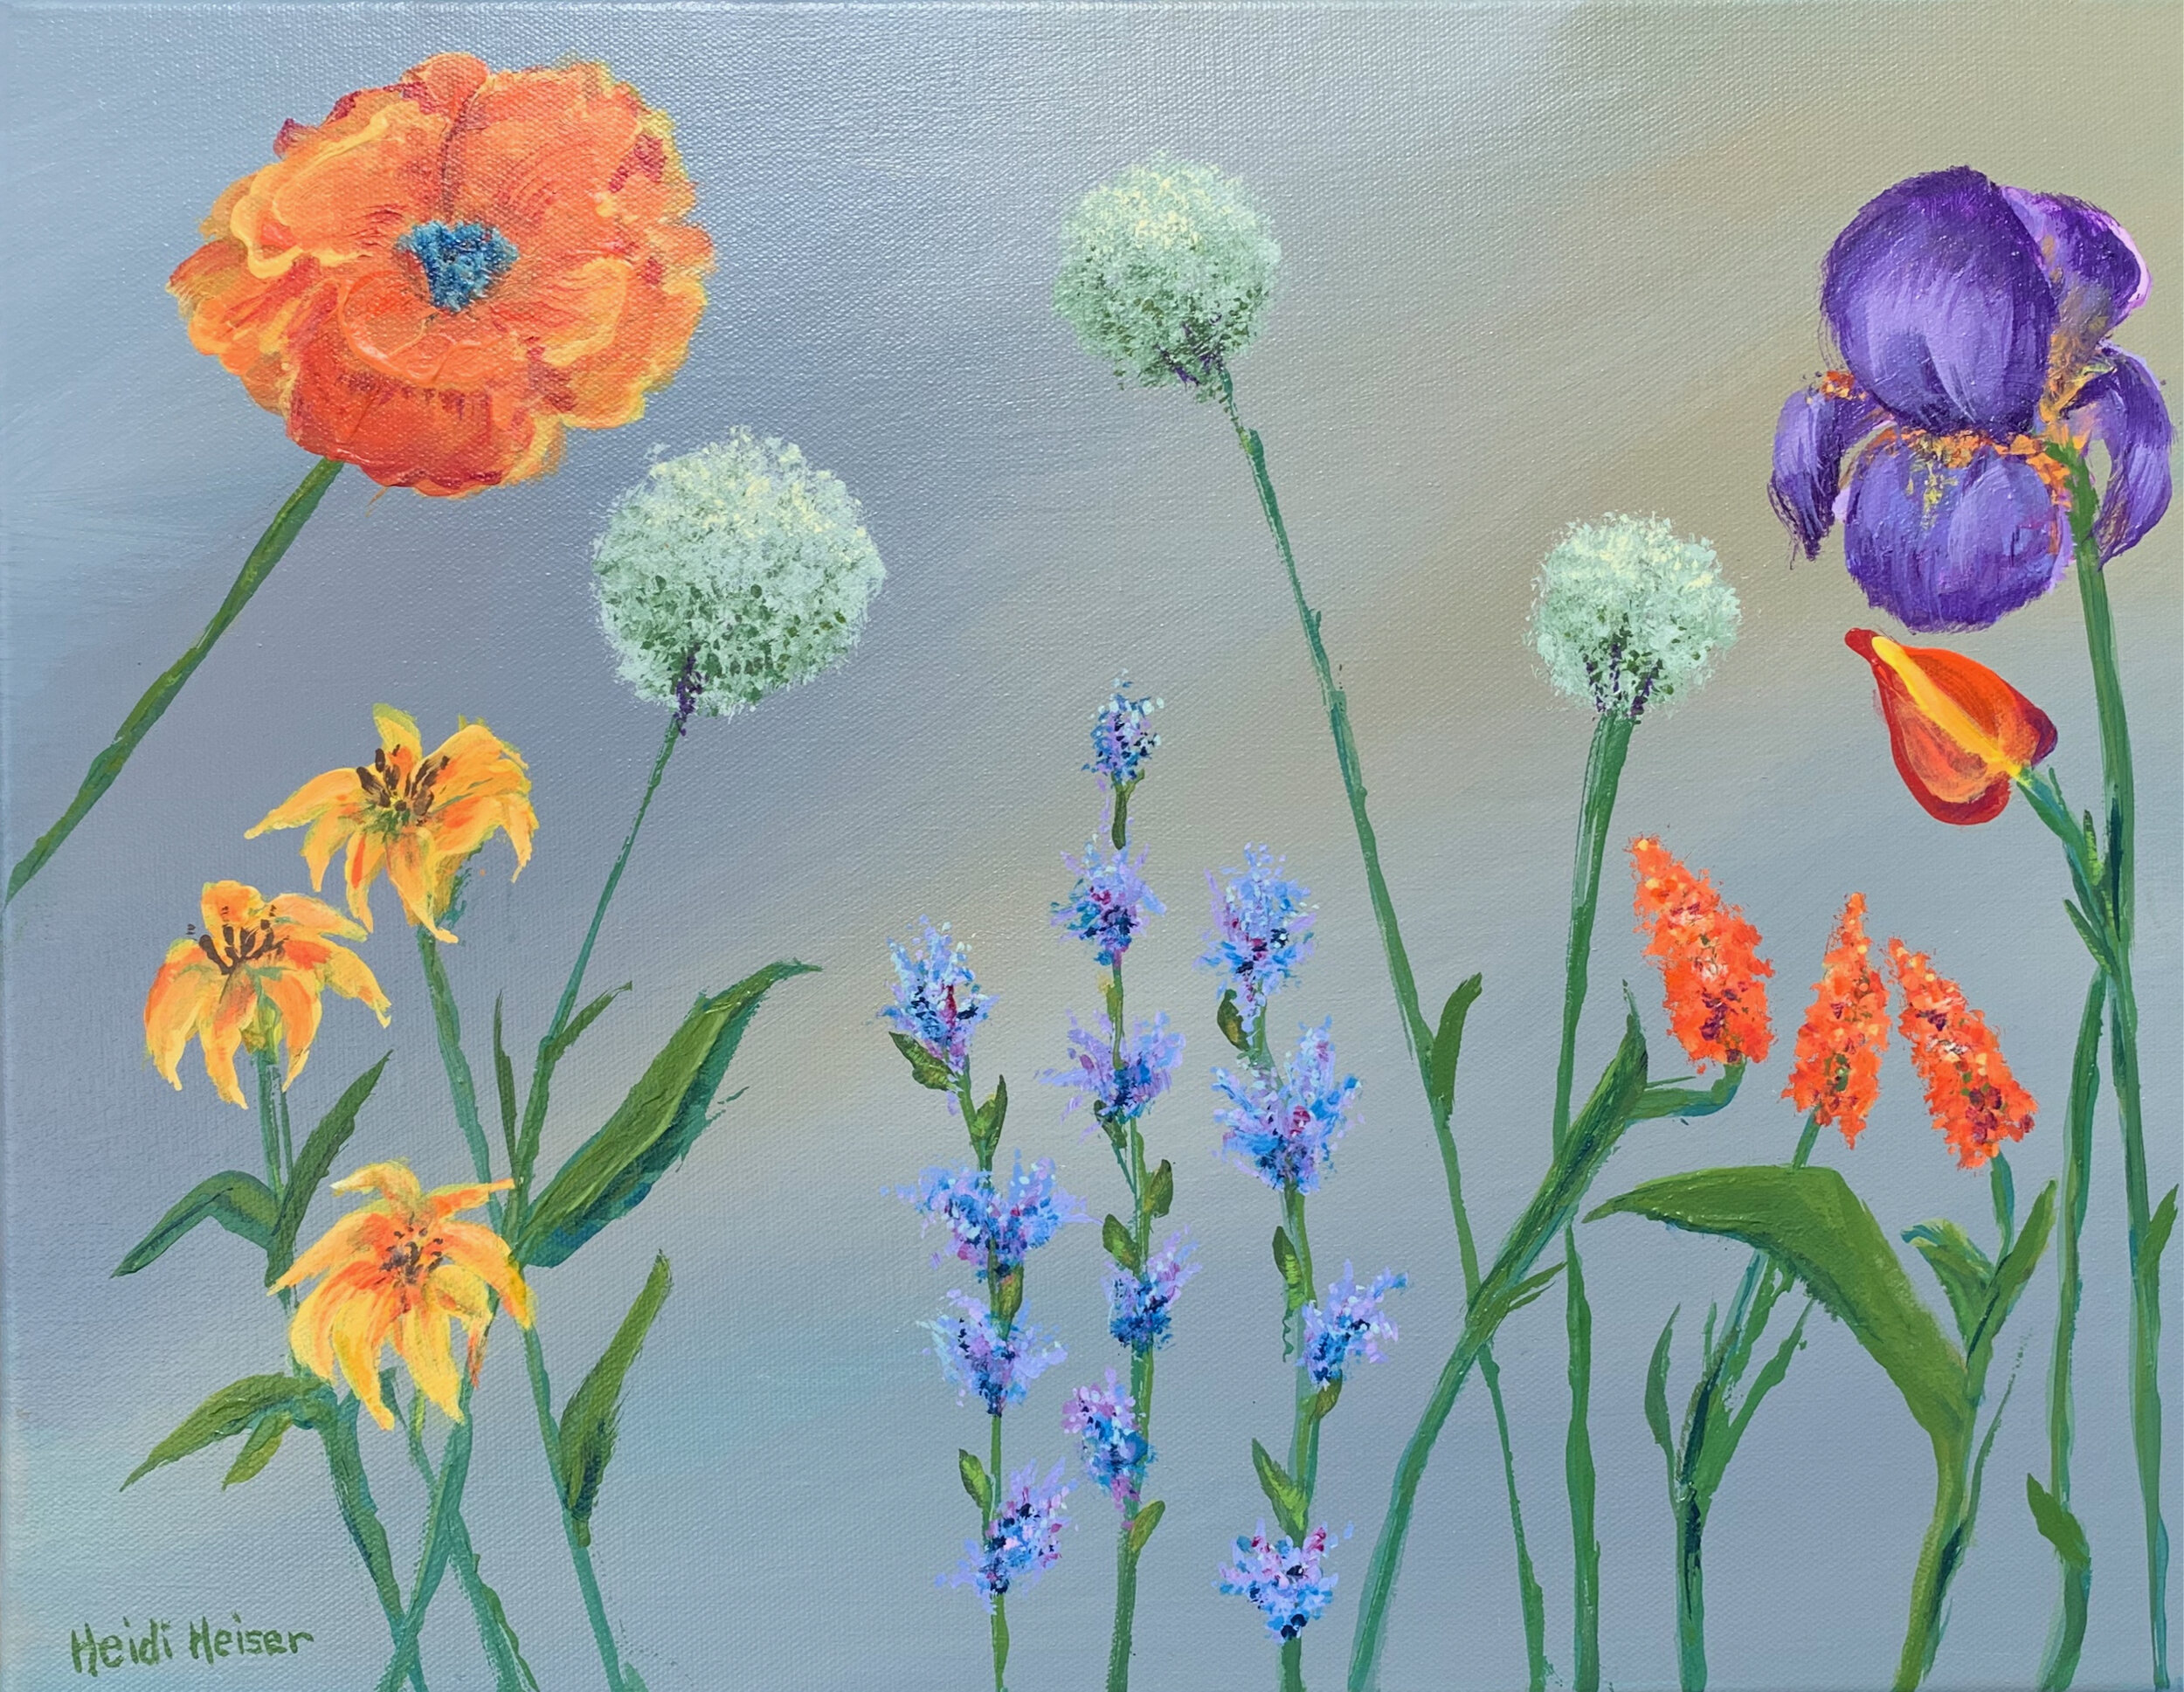 FLOWER ROW is a colorful, fun original acrylic painting, 18 x 14 inches —  Artist Studio 27 - original fine art acrylic and oil paintings